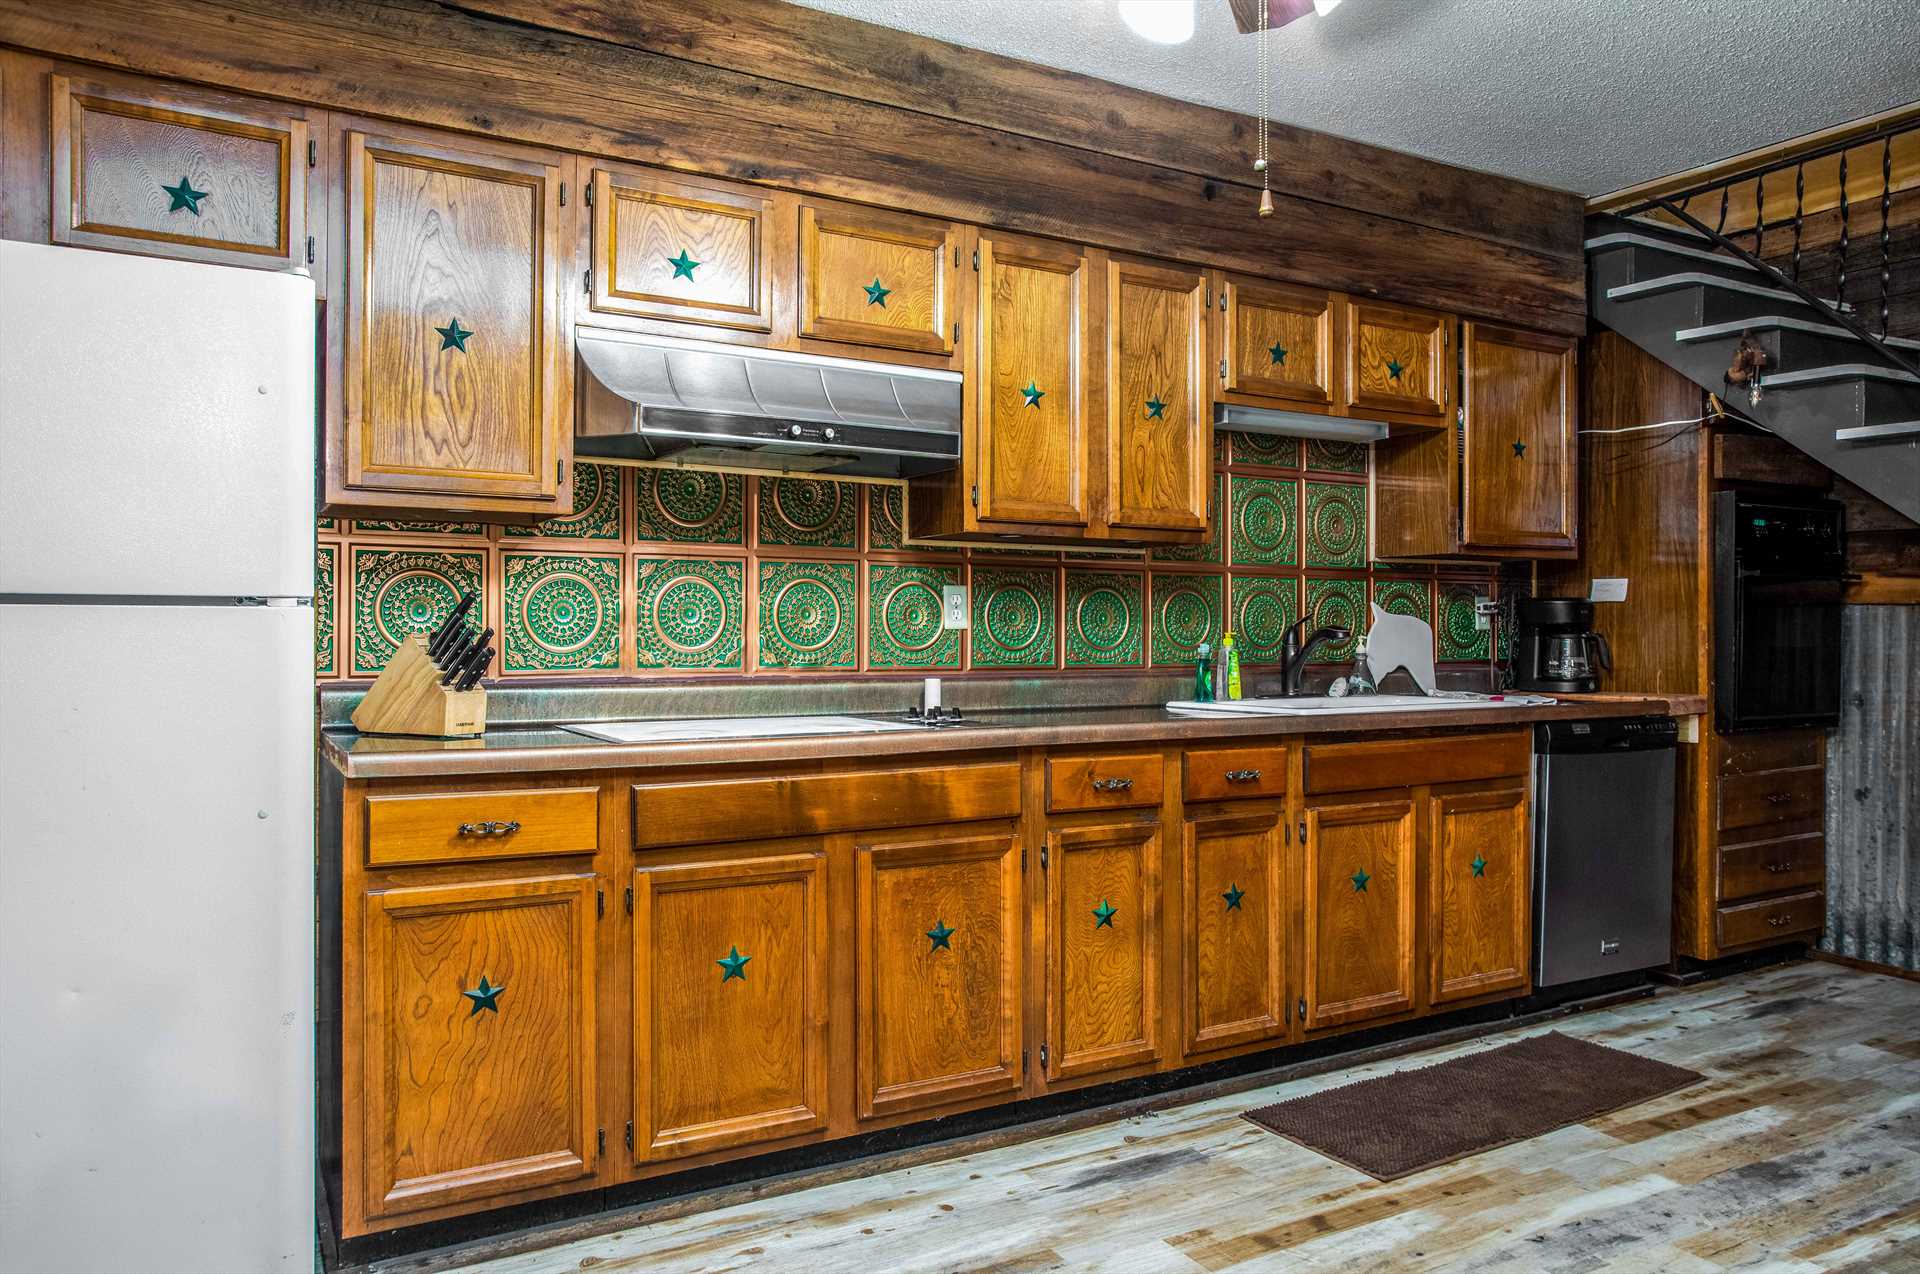                                                 The Lone Star-themed cabinetry in the kitchen contains all the cooking ware, serving ware, utensils, and glasses you'll need for even the biggest meals!